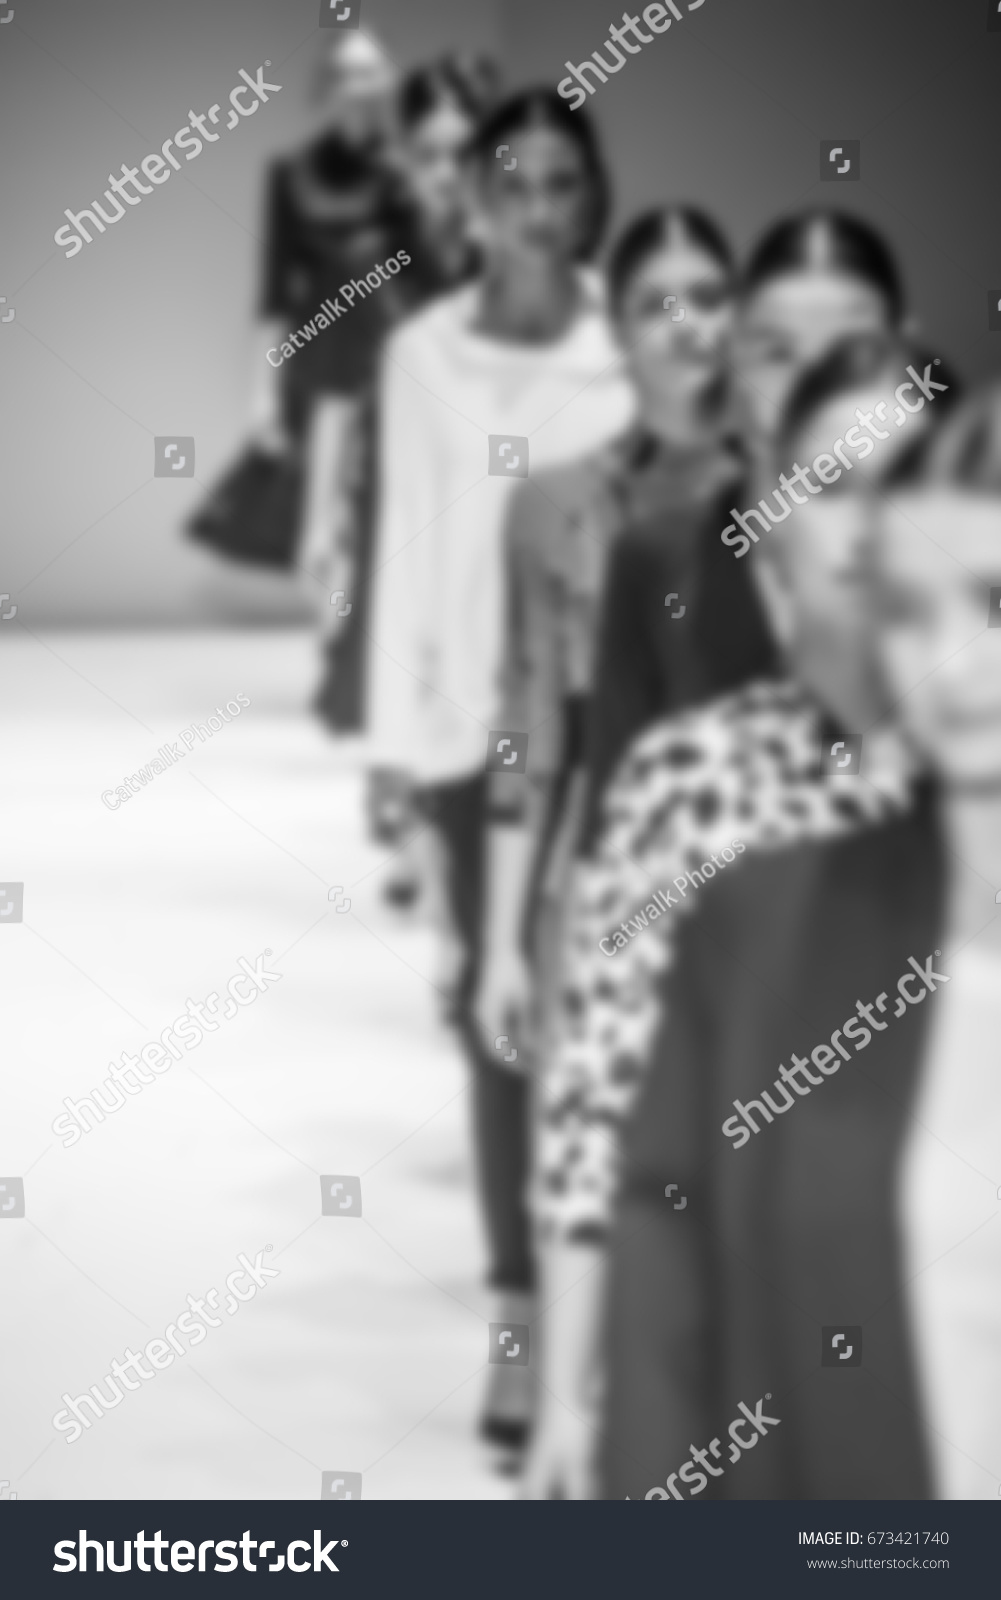 Fashion Show, Catwalk, Runway Event themed photo blurred on purpose #673421740